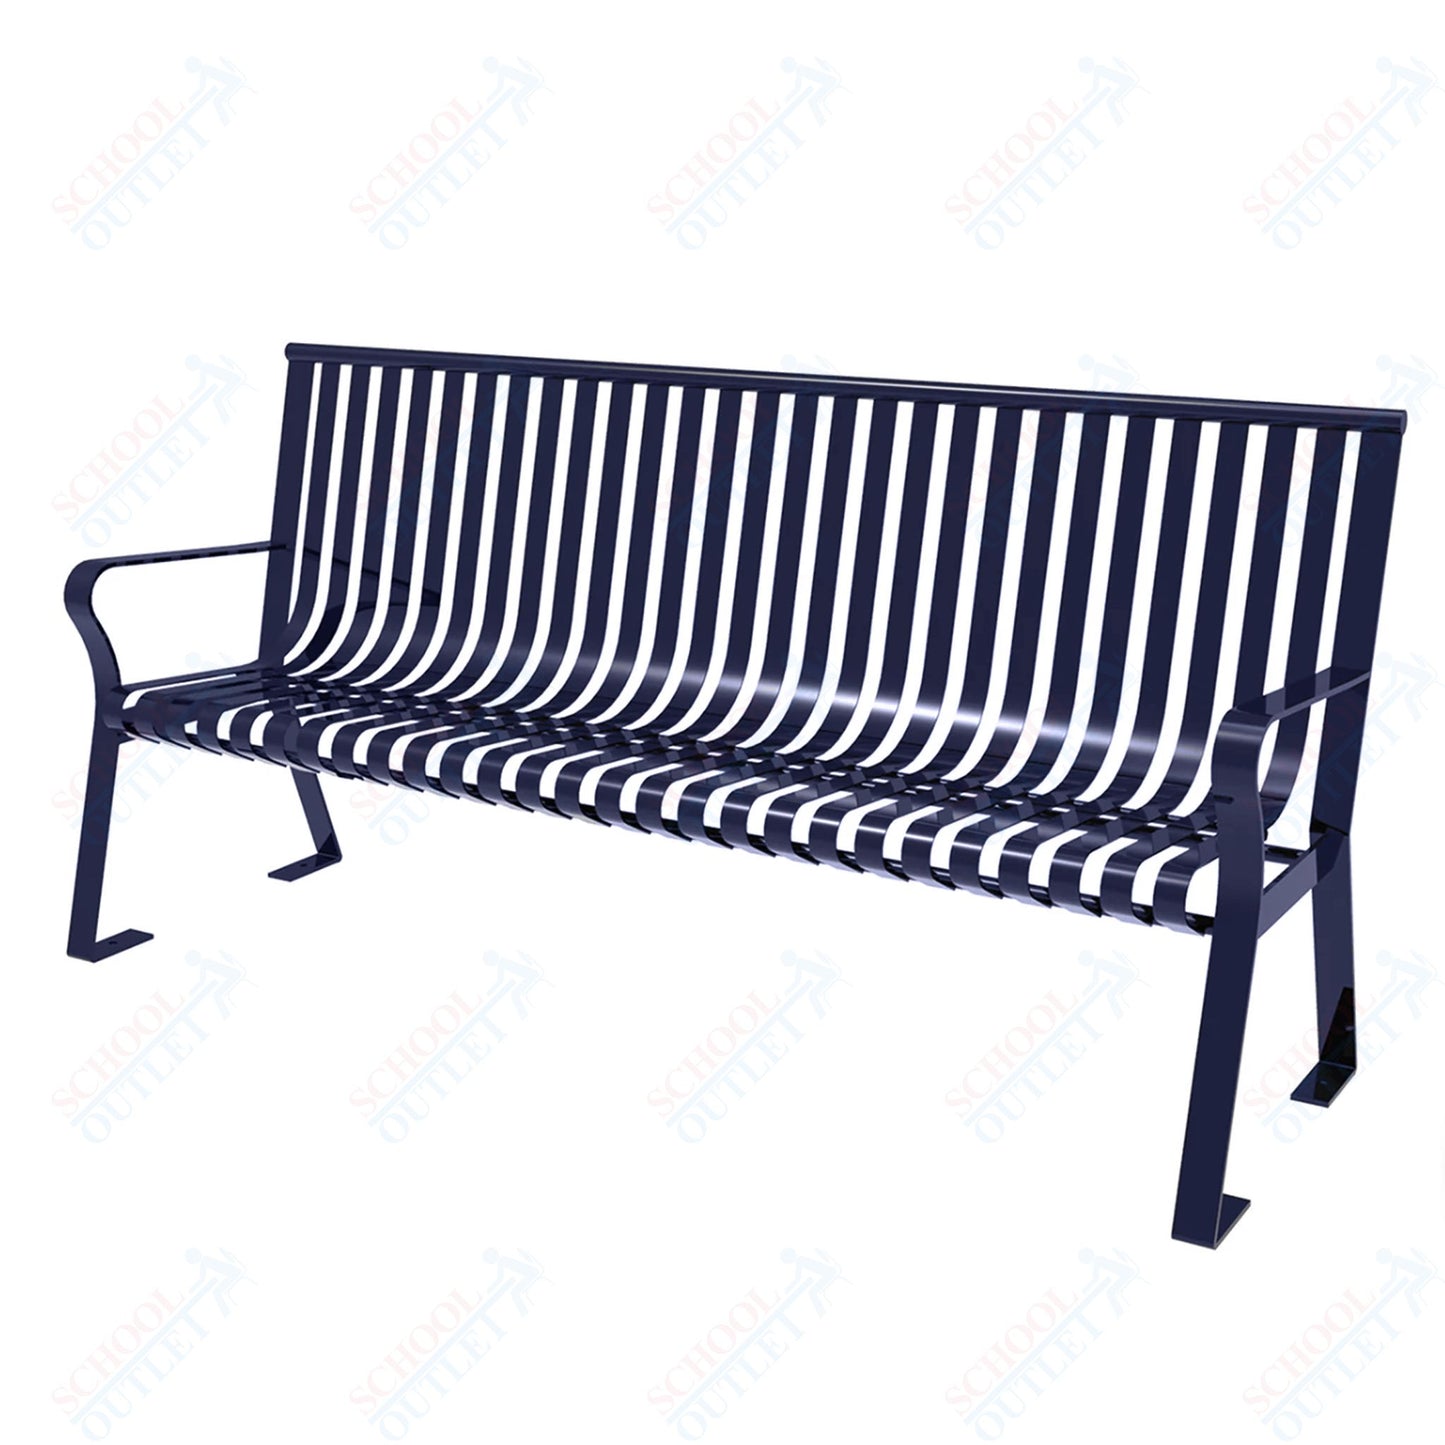 MyTcoat - Downtown Outdoor Bench with Straight Back - Strap Metal - Portable or Surface Mount 6' L (MYT-BDT06-I-55)